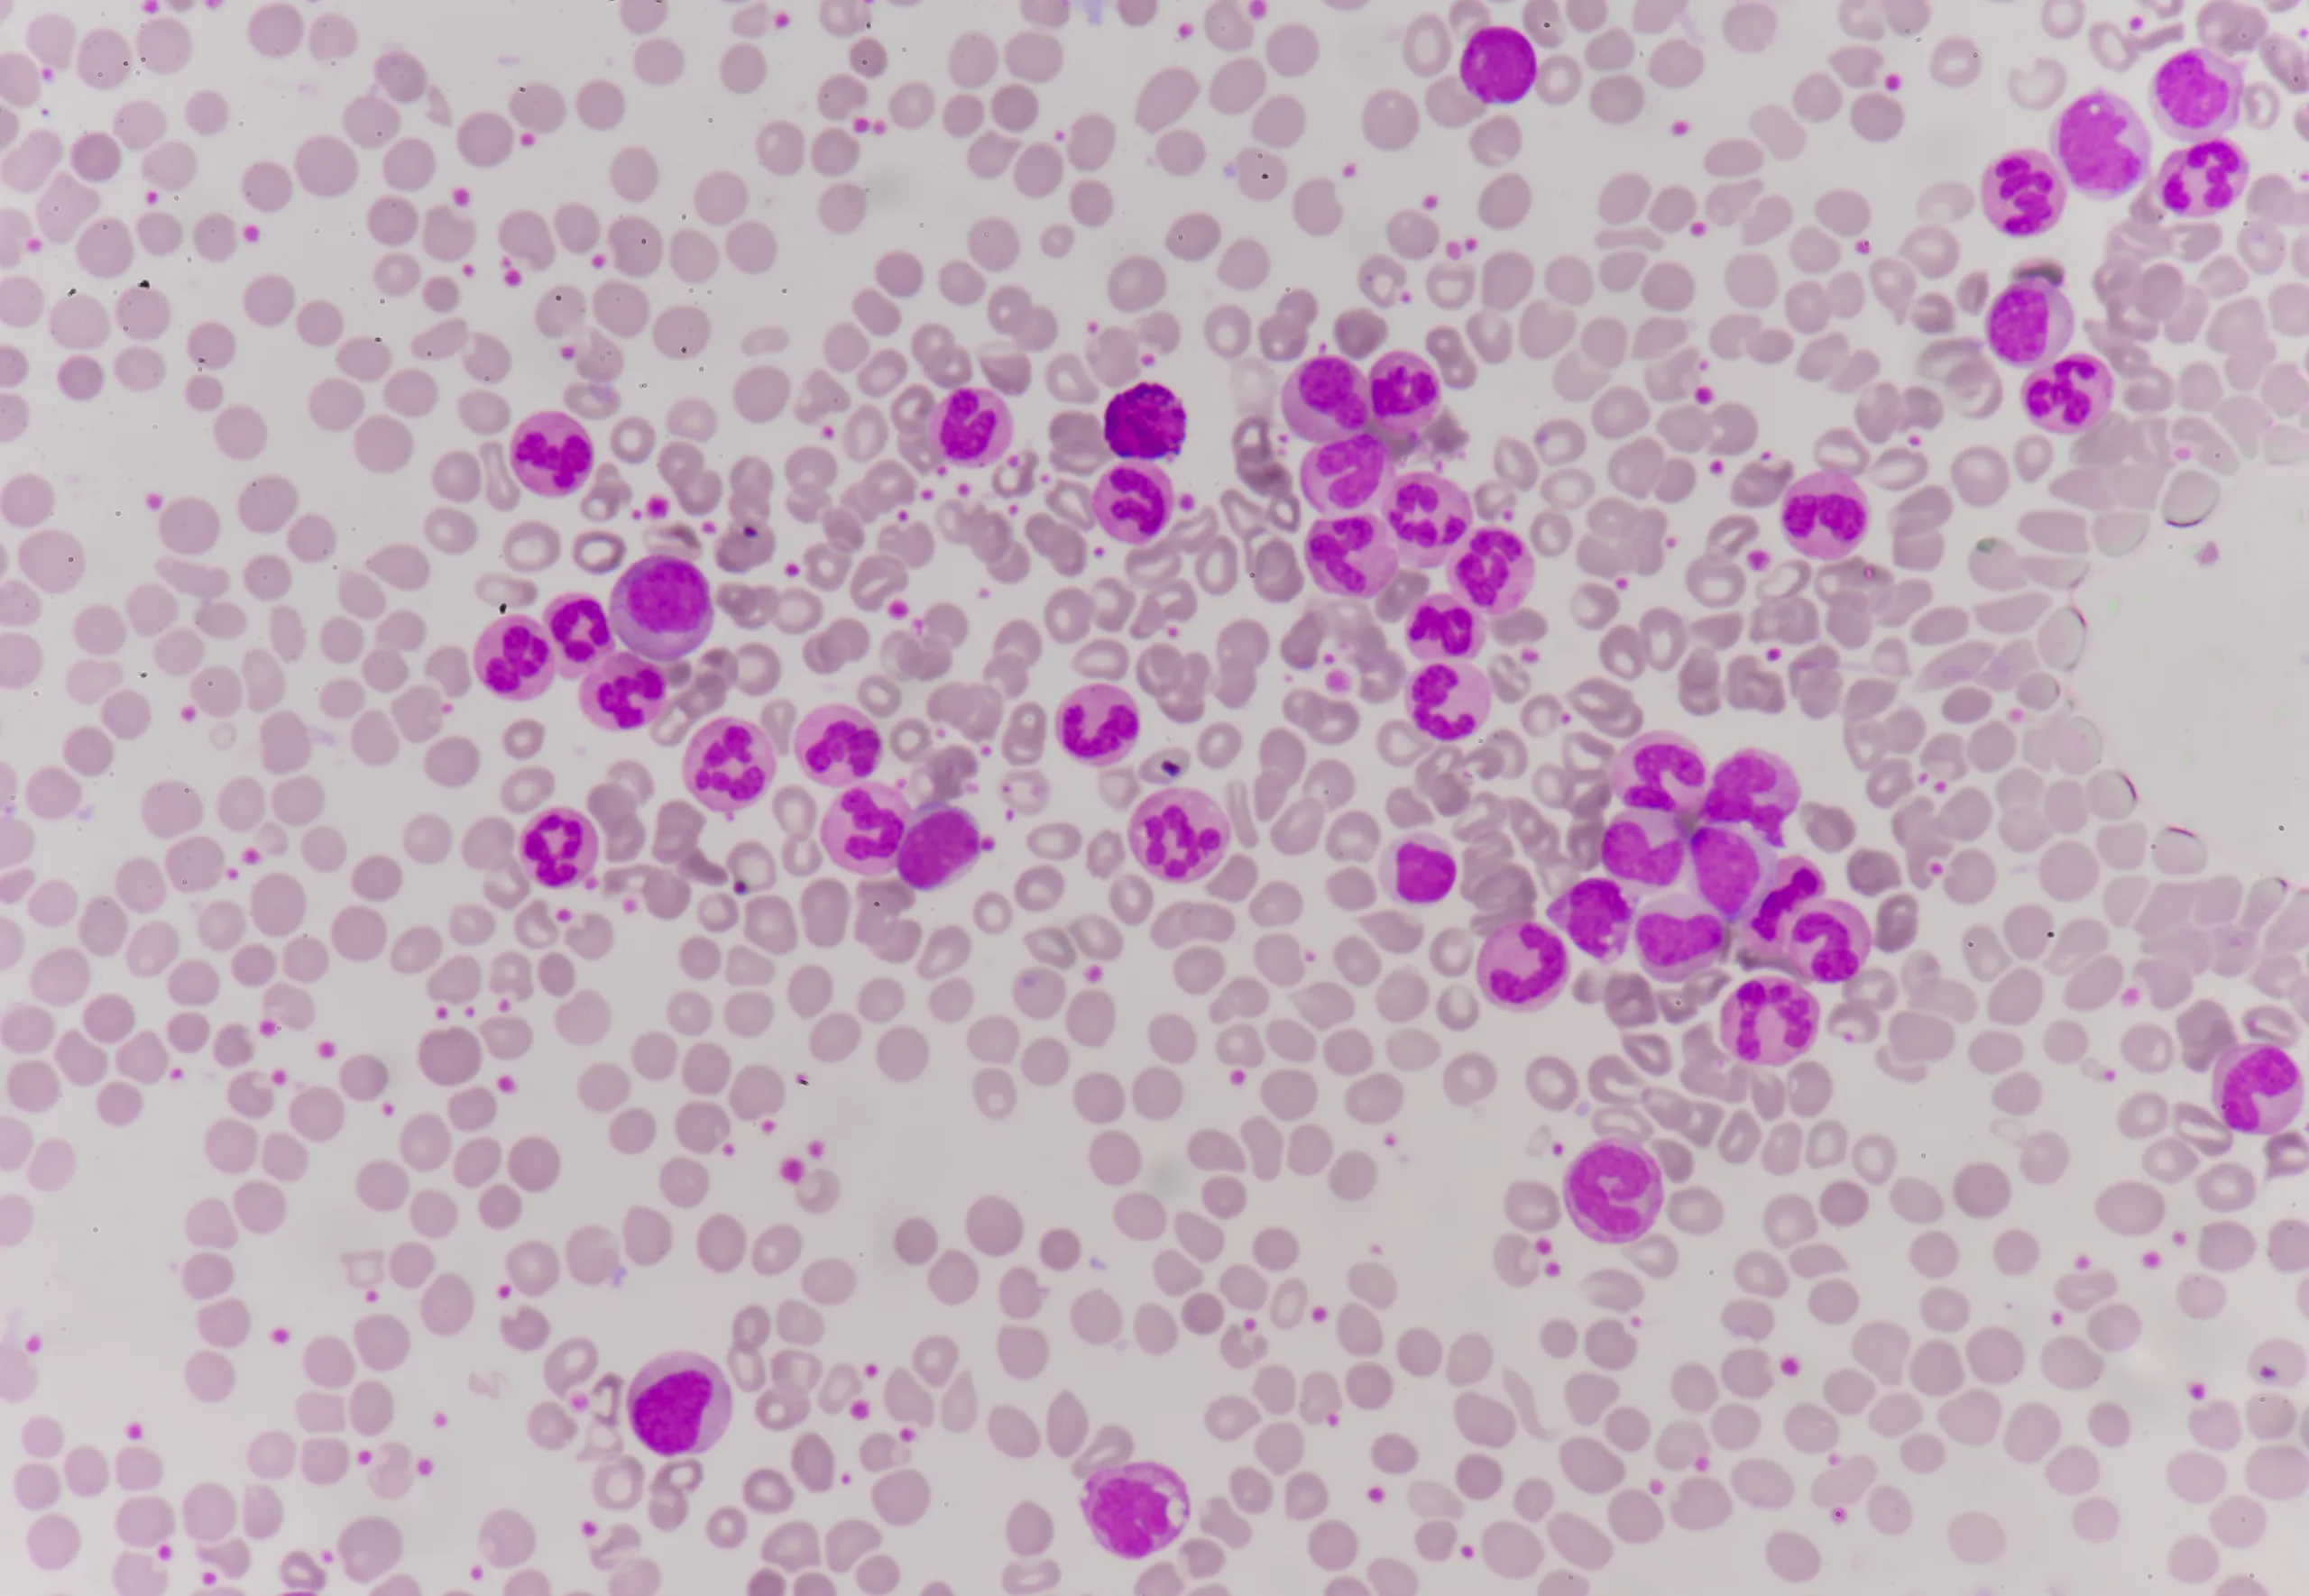 Moderate WBCs and mature neutrophils on a Red blood cell background